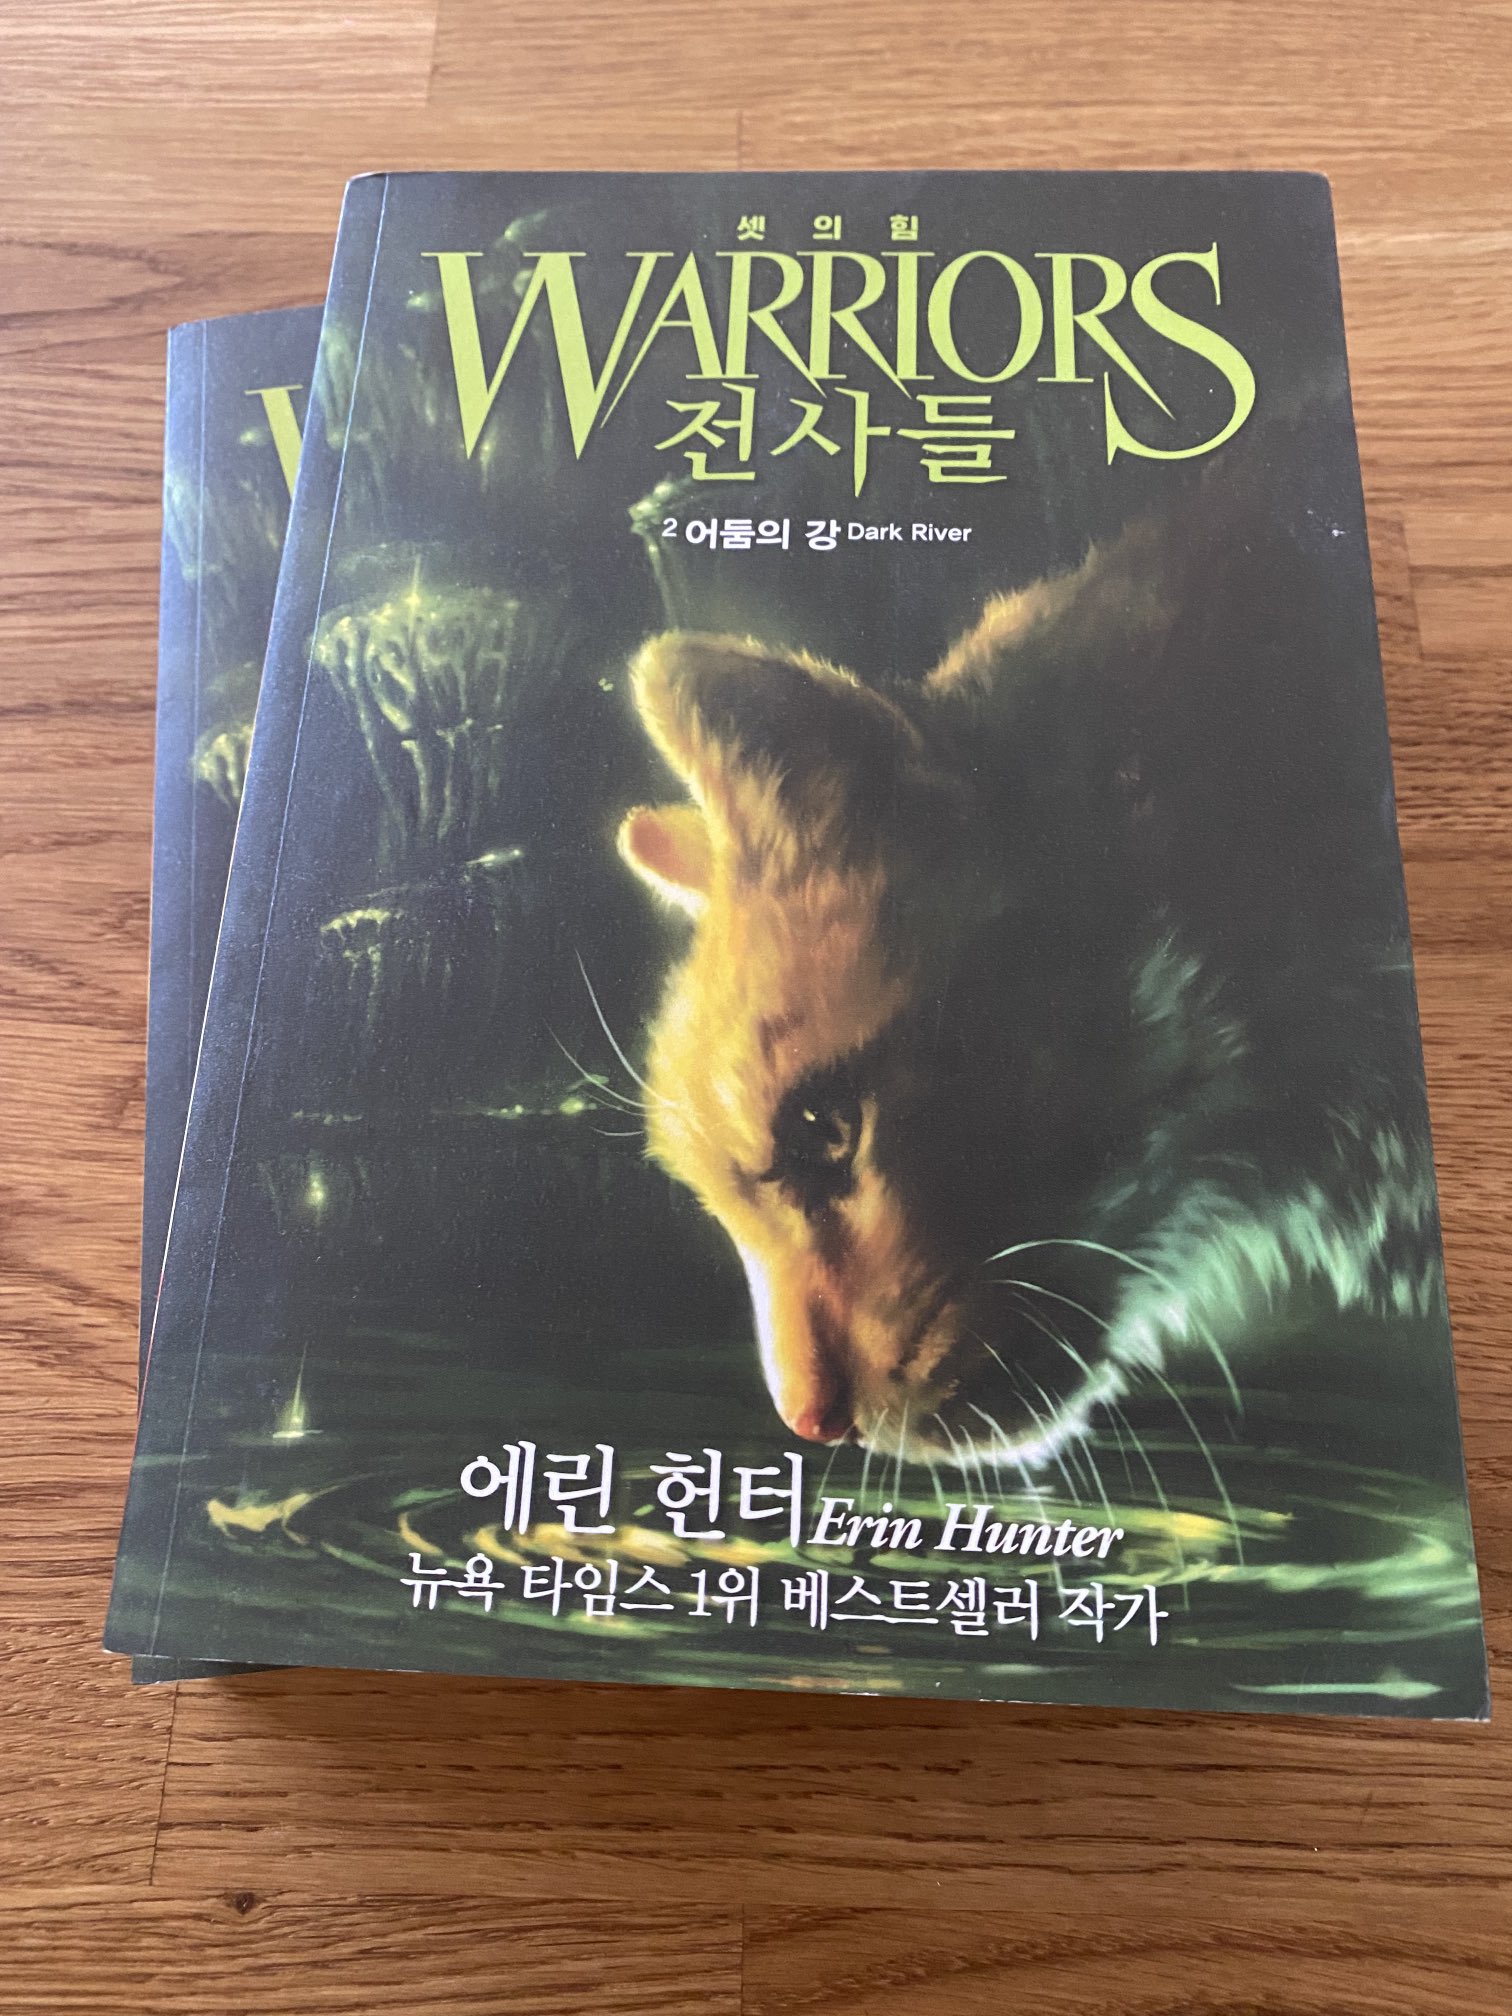 Kate Cary - Three lovely new #warriorcats books arrived on